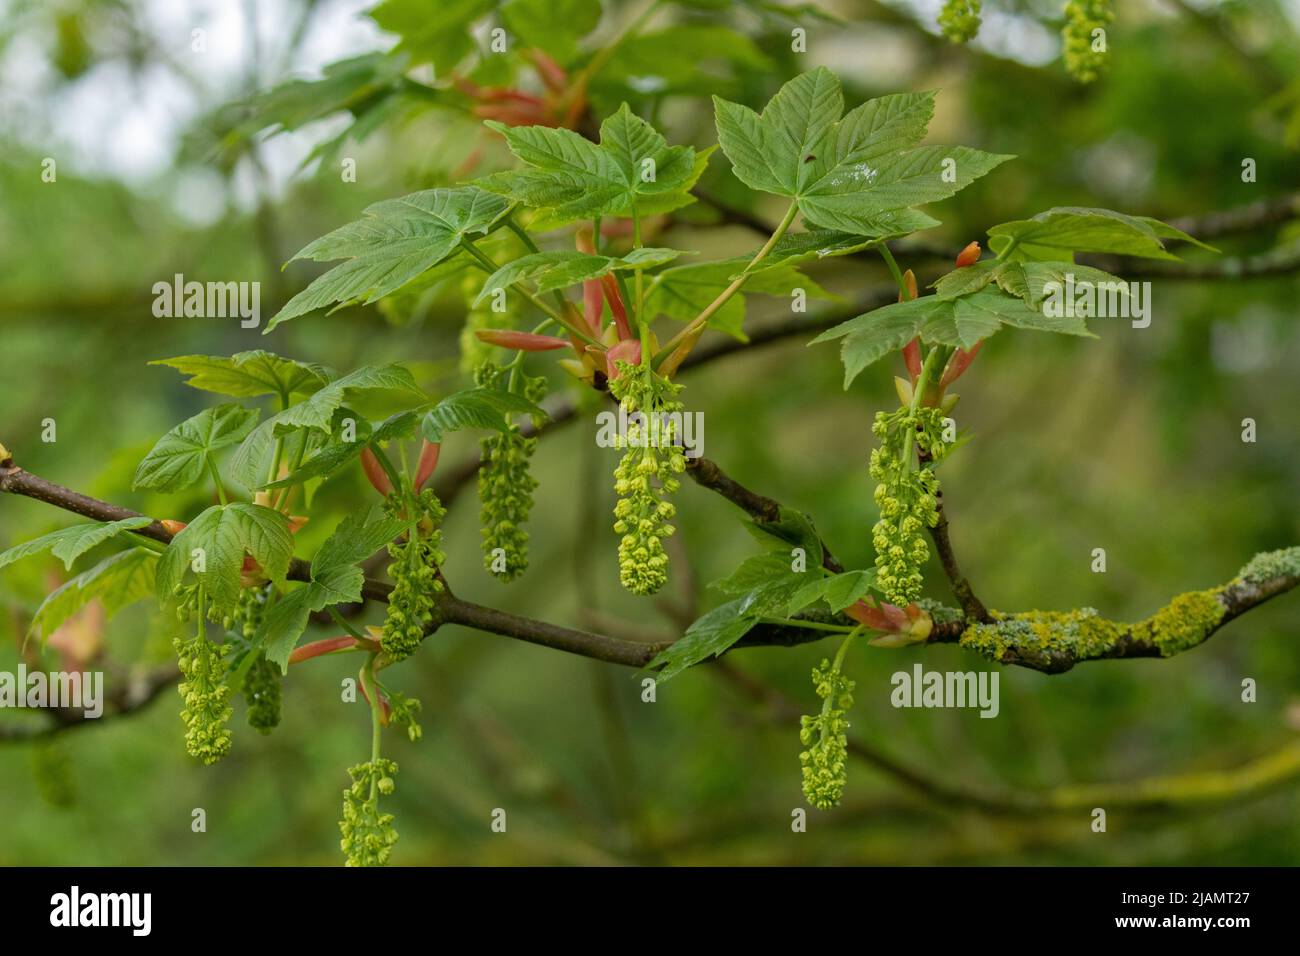 Sycamore Tree (Acer pseudoplatanus) flowers. The flowers are known as pendulous spikes or panicles. The tree is in Baildon, Yorkshire, England. Stock Photo